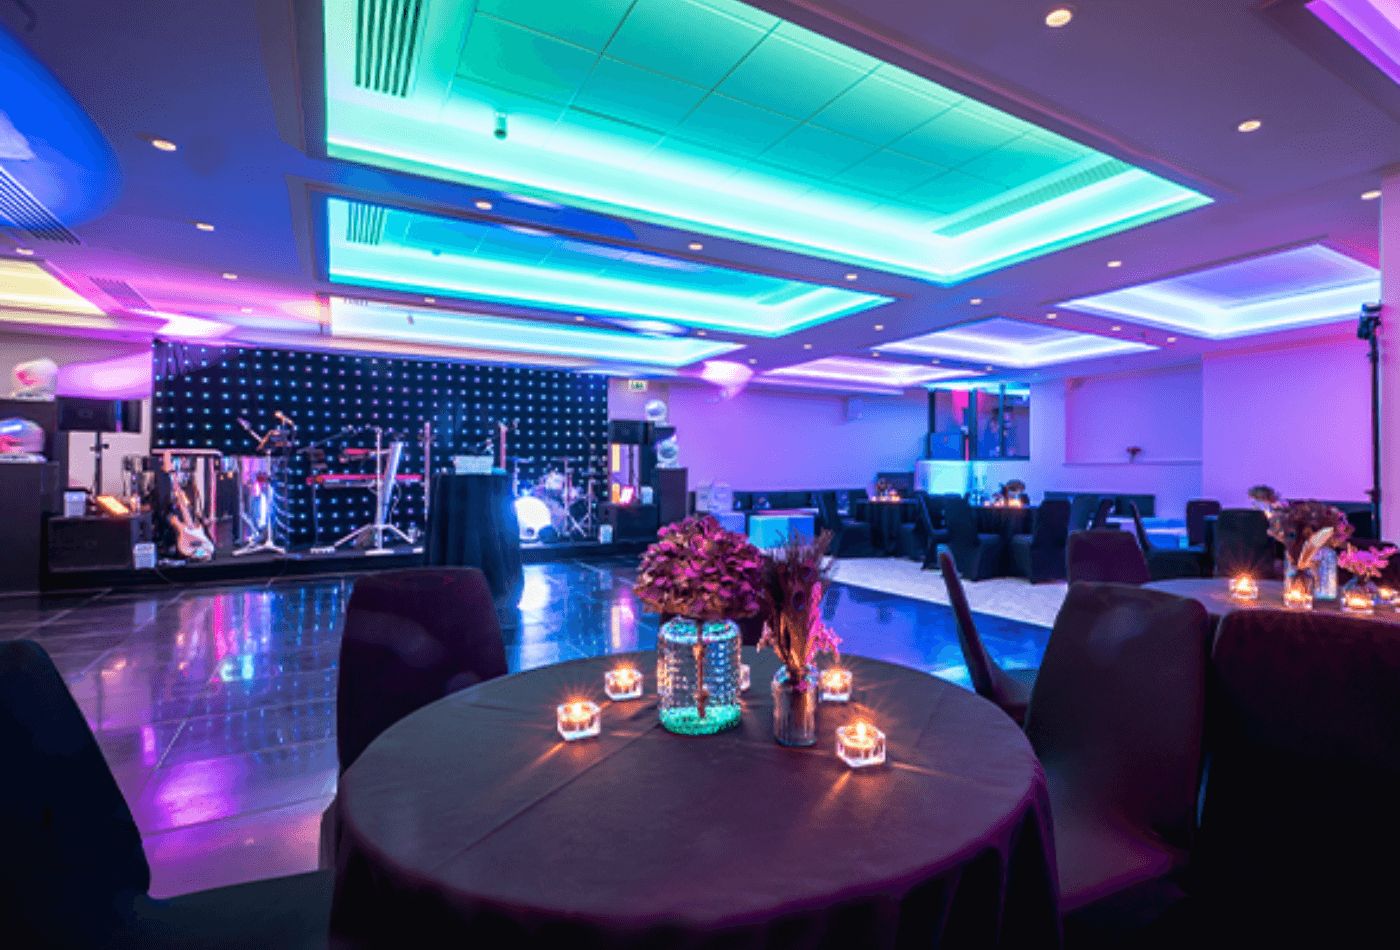 Dance floor with stage and ceiling lit up in turquoise